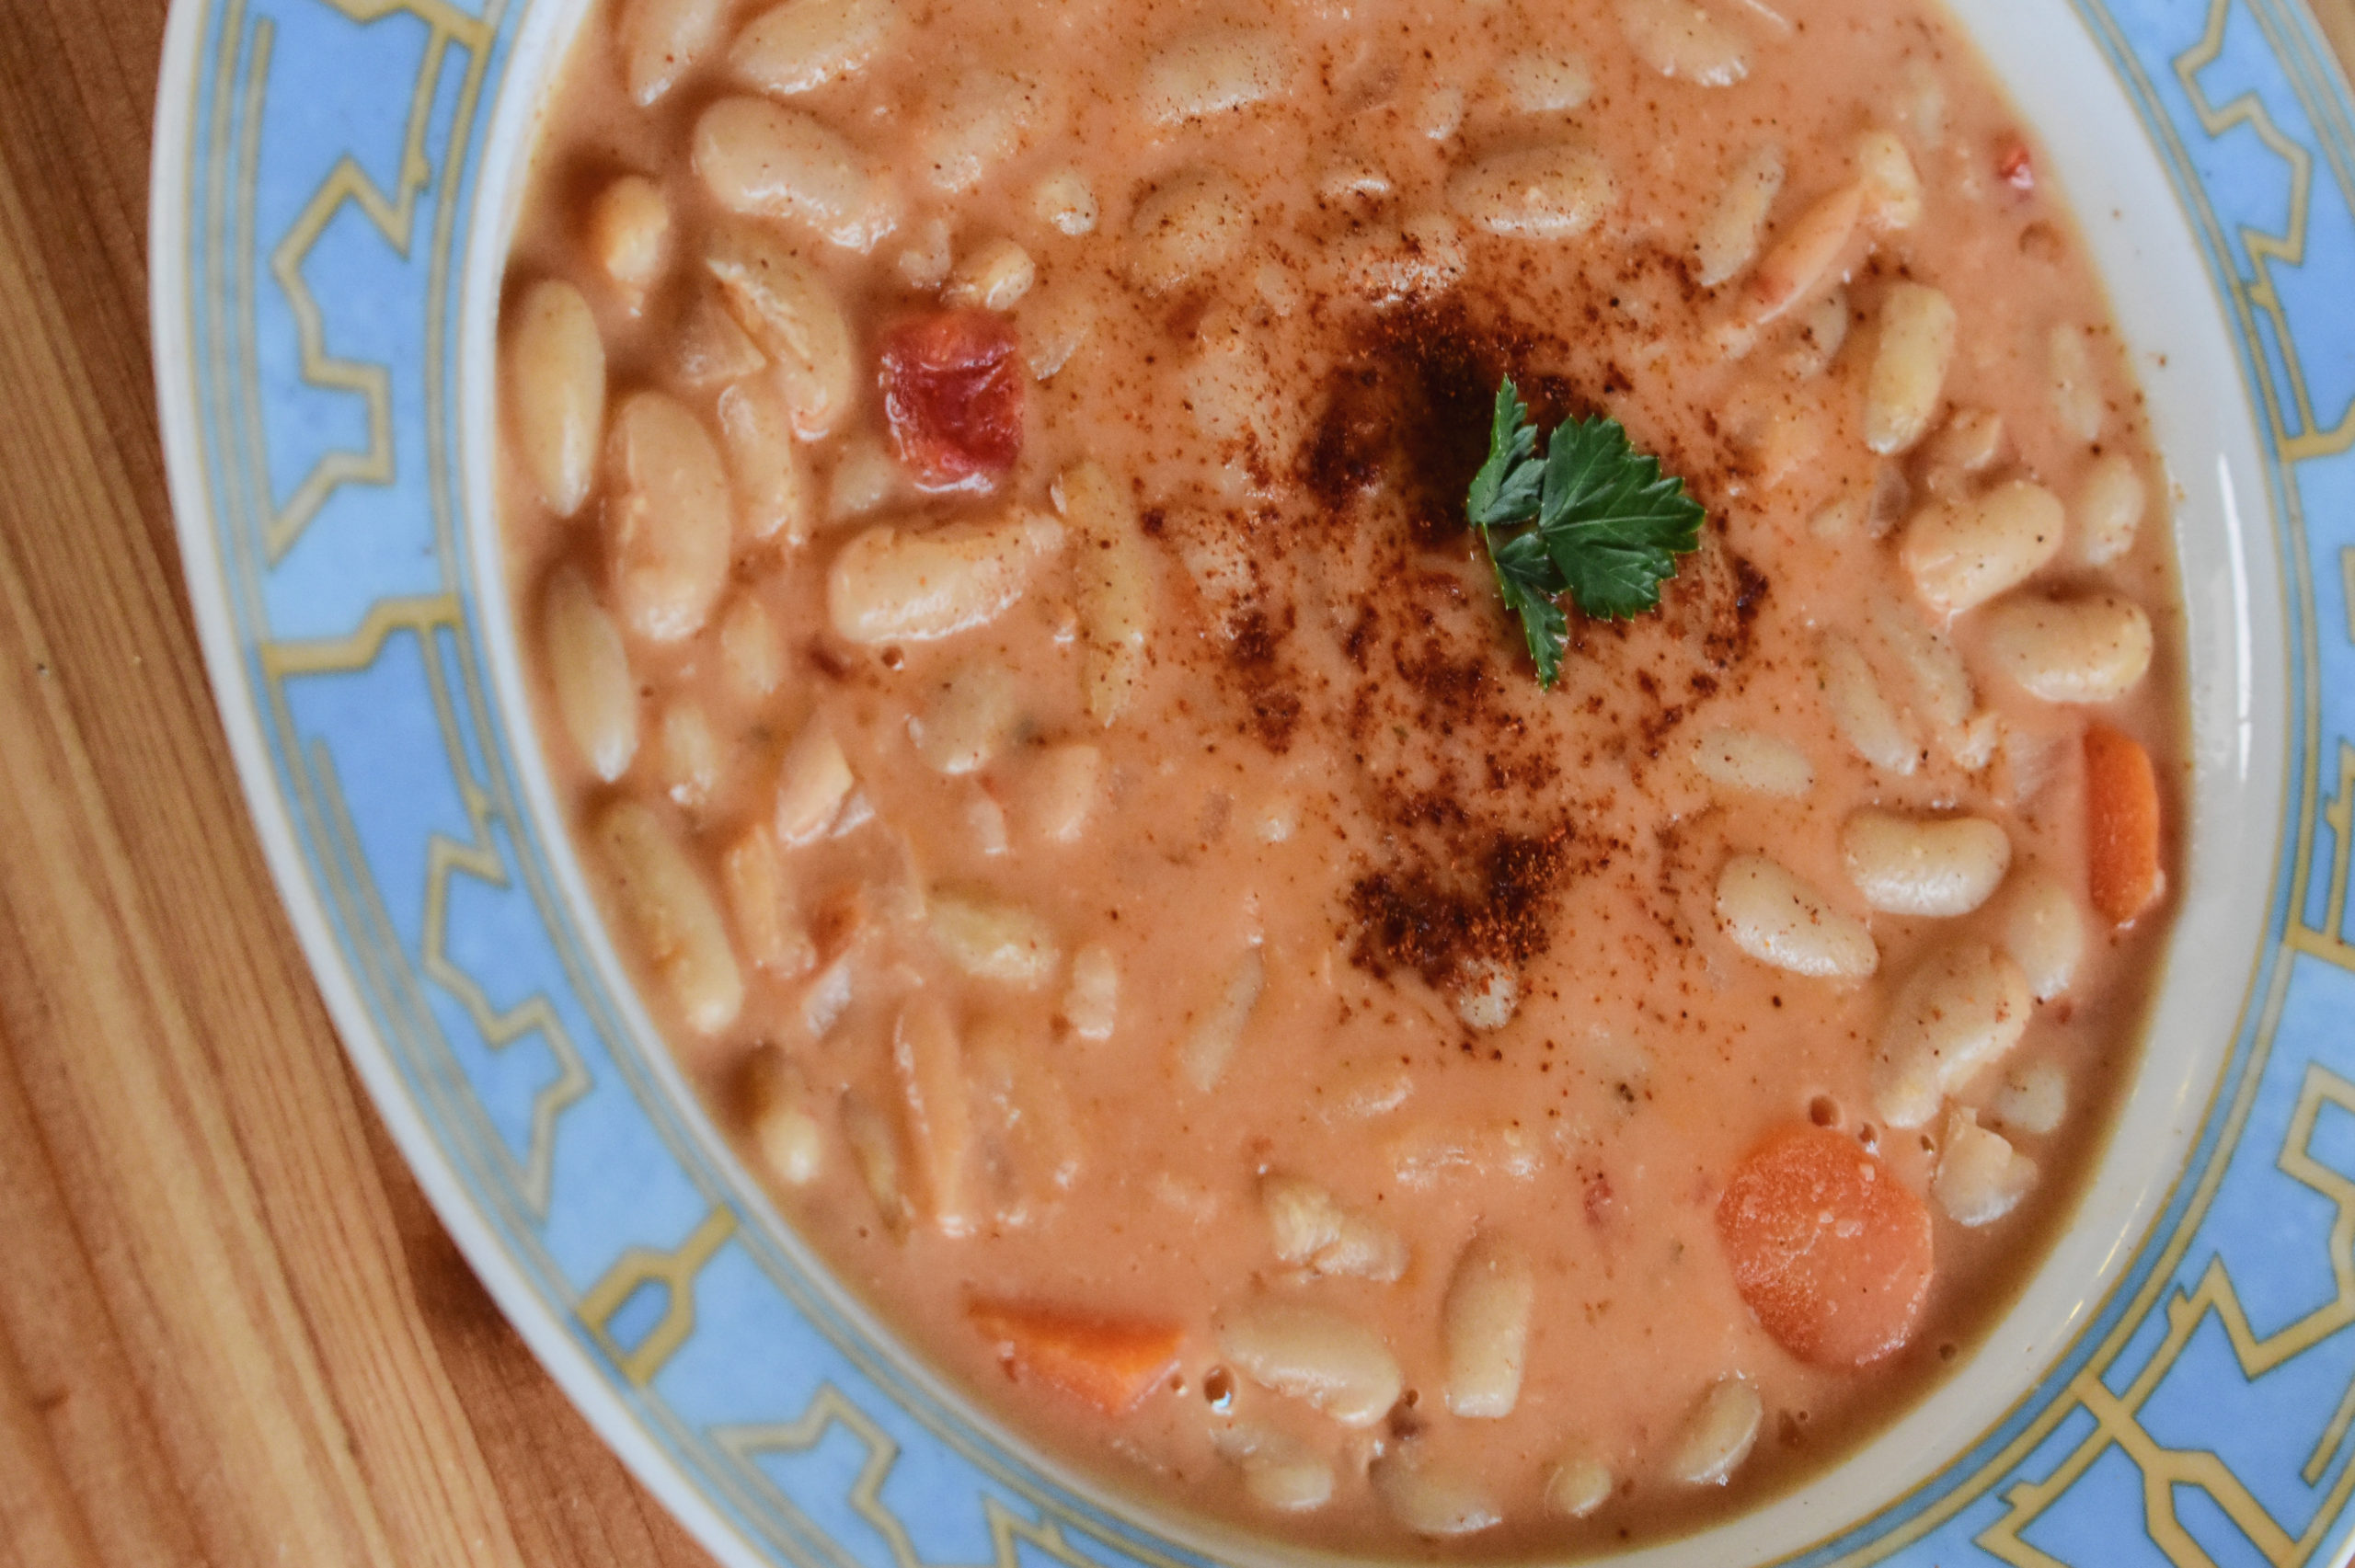 Creamy soup with beans and carrots